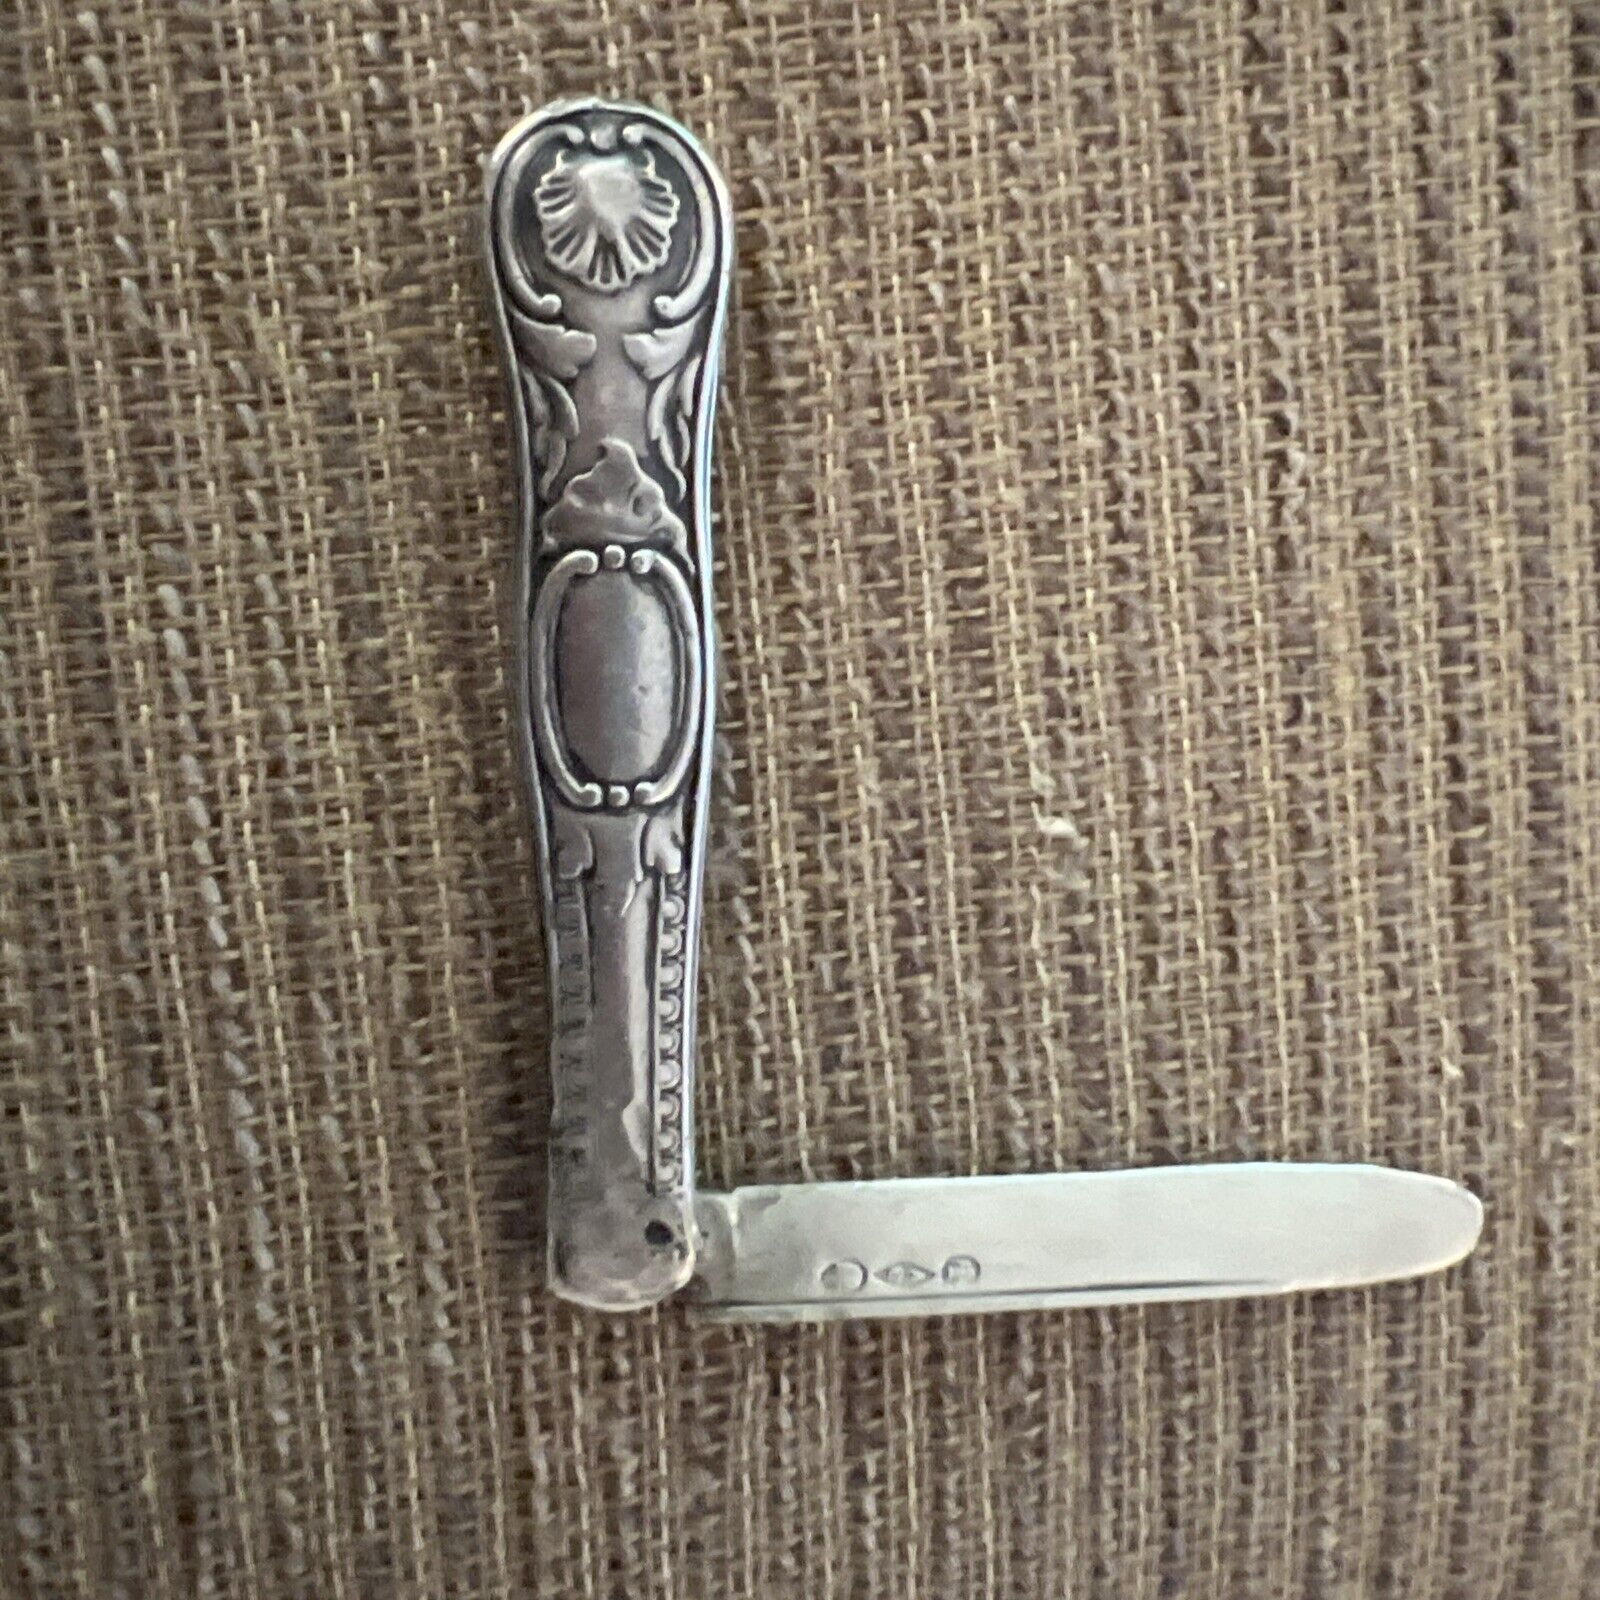 Antique Early USA Mid 1800’s SOLID STERLING  POCKET KNIFE.